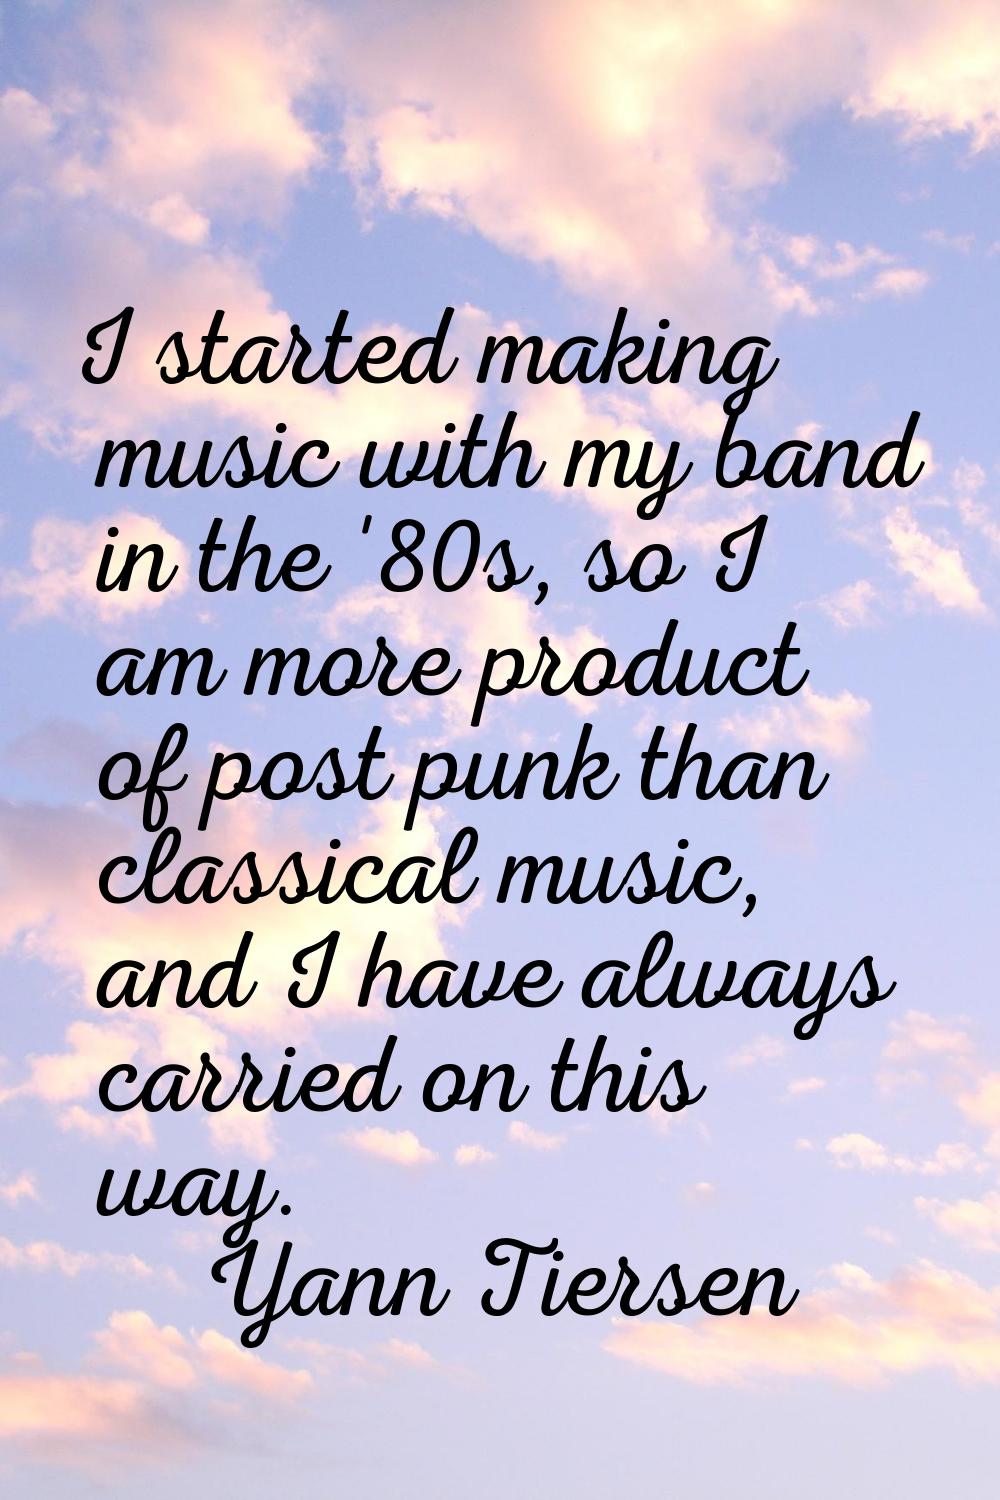 I started making music with my band in the '80s, so I am more product of post punk than classical m